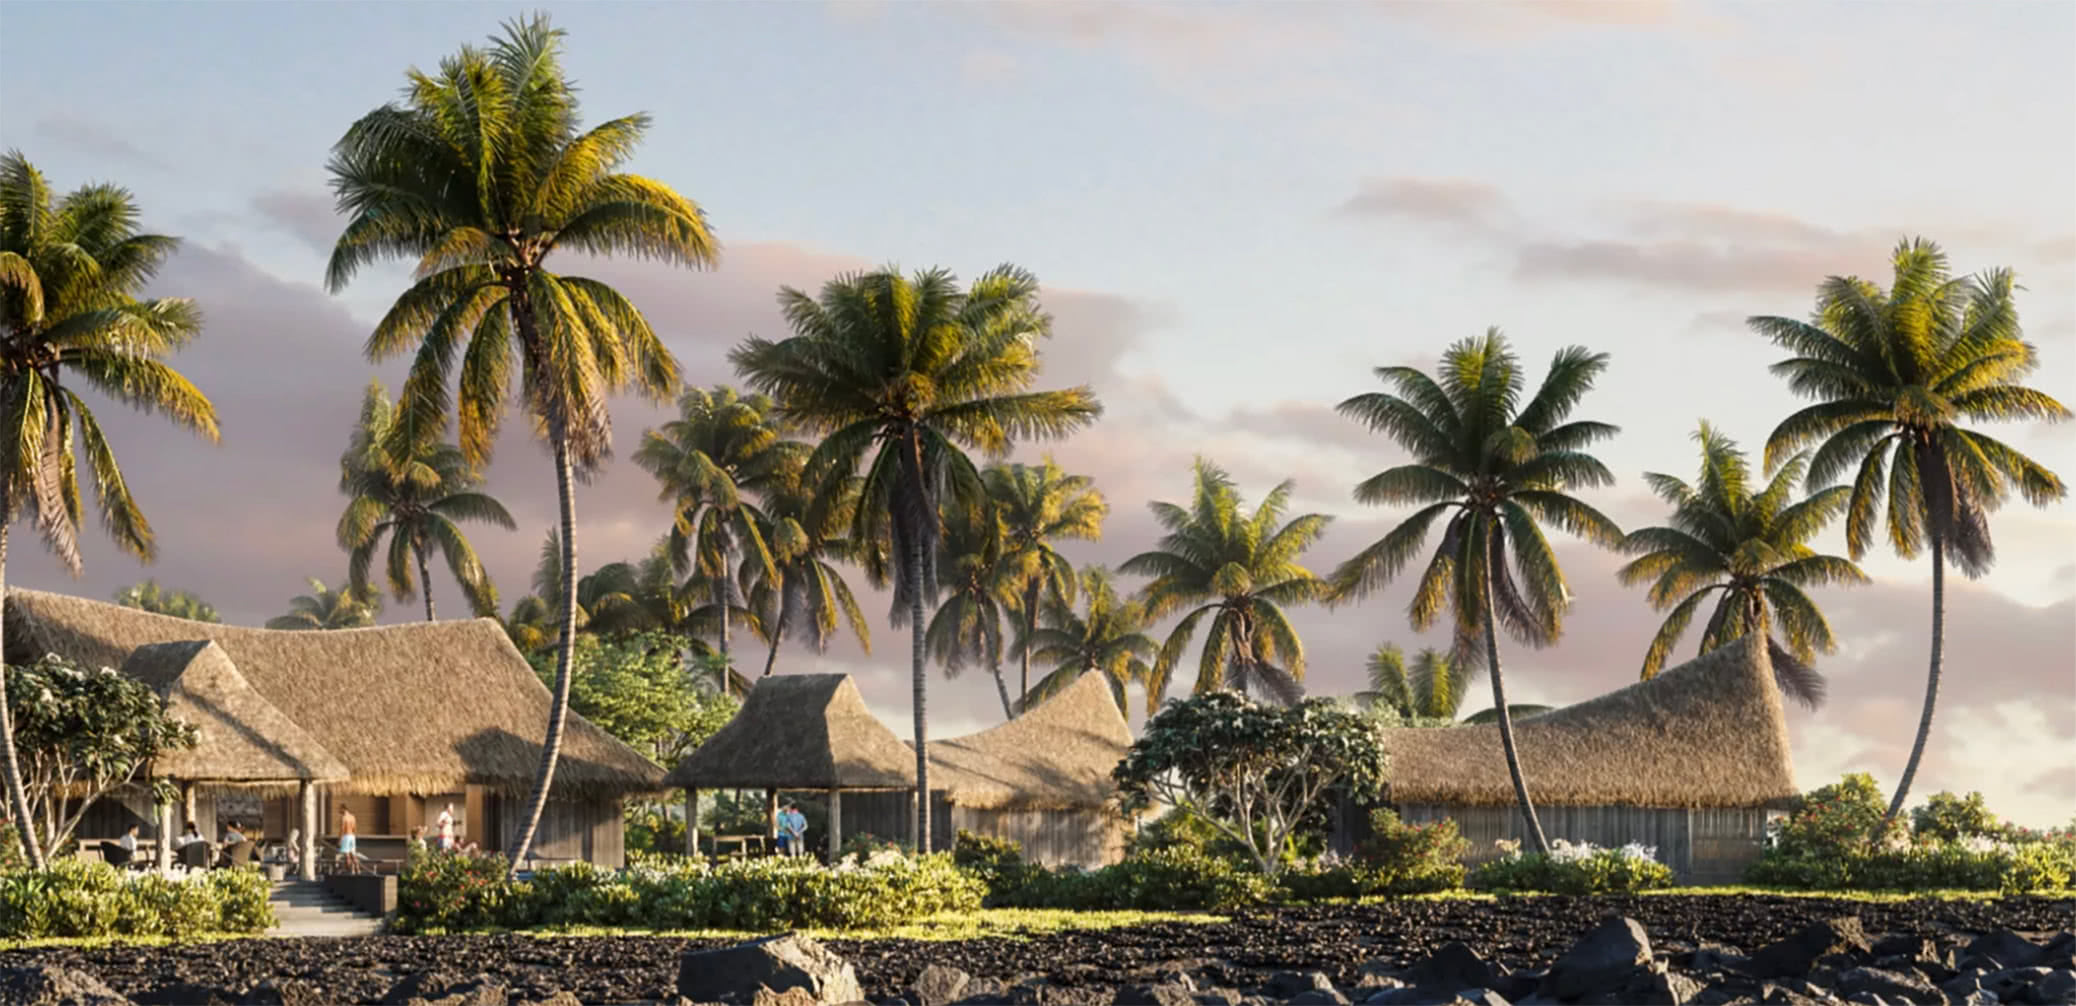 Opening Date Announced For Rosewood Kona Village